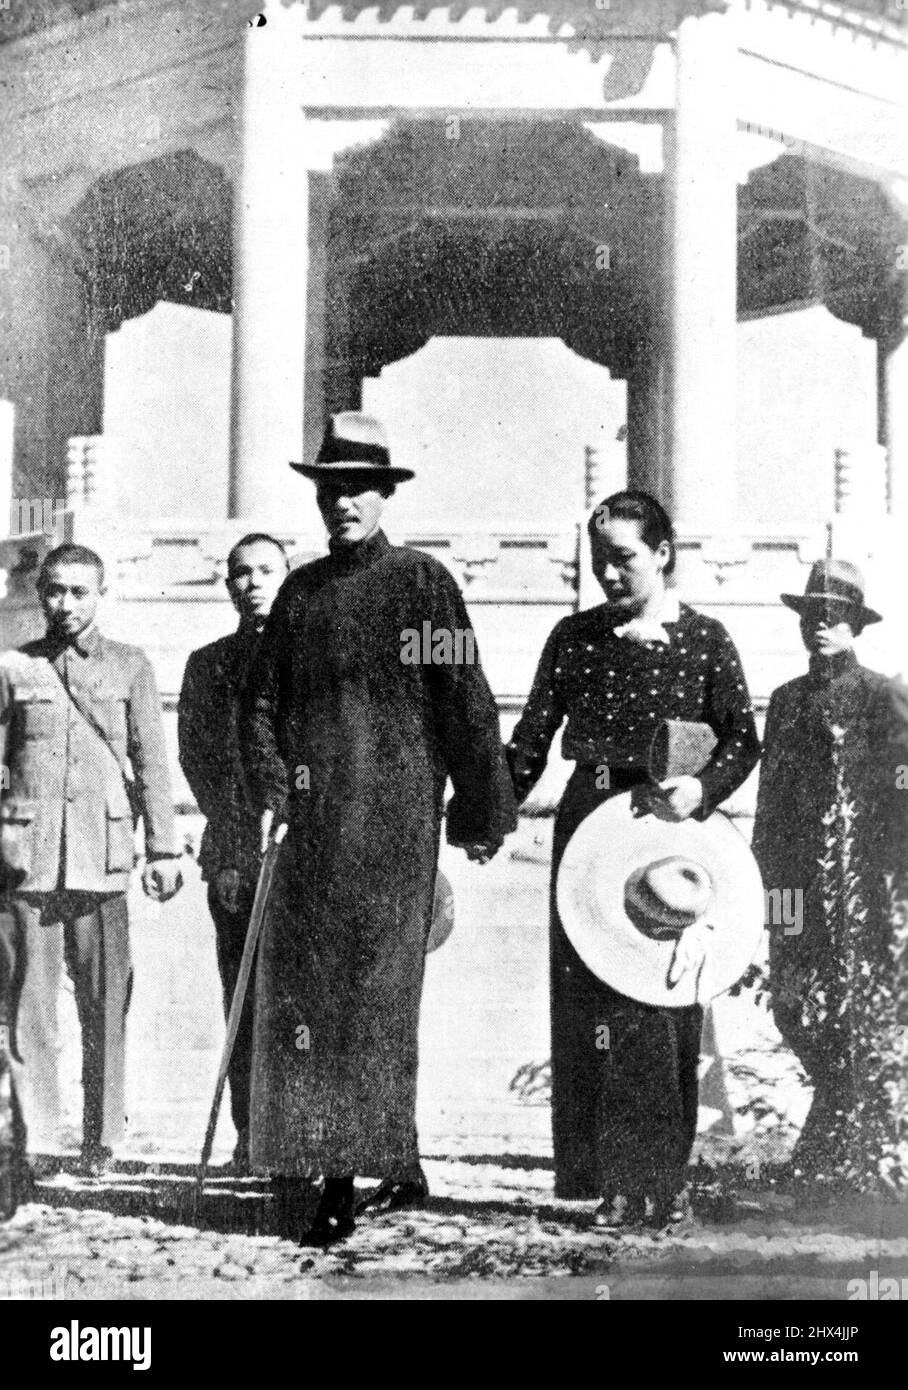 Chiang Kai-Shek and Mrs. Chiang (Sung Mei-ling) on the ceremony of birthday, reproduced form the China Press. Generalissimo's Birthday..... The 51st anniversary of birthday of Chinese Generalissimo Chiang Kai-Shek was held on the 18th October at his residence in Nanking, avoiding the Japanese planes' bombing. November 4, 1937. (Photo by The Domei News Photos Service). Stock Photo